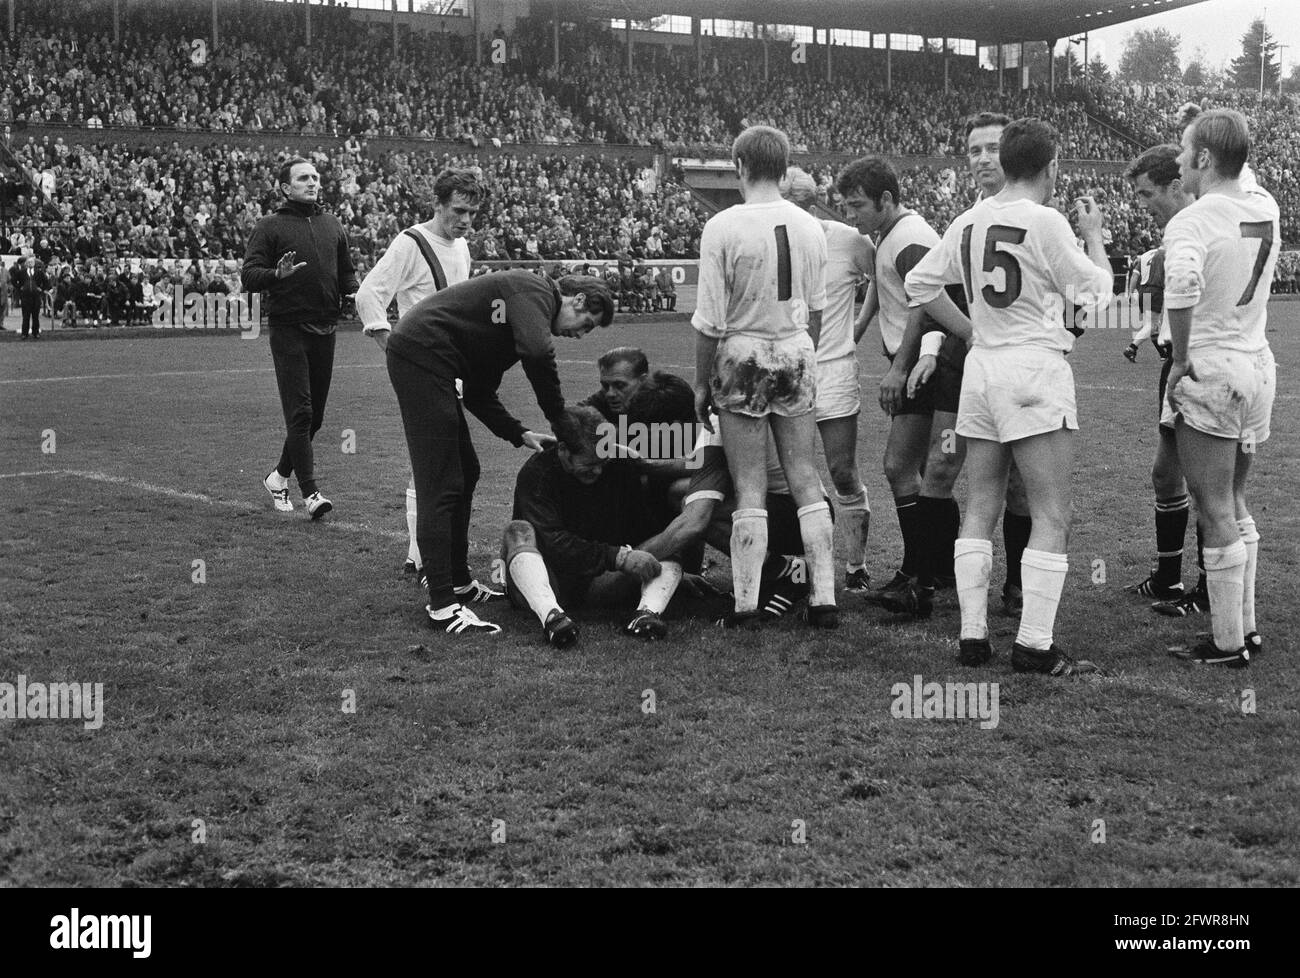 NEC v Feyenoord 0-2. A. C. Milan assistant coach Maldini on stand, October 26, 1969, sports, soccer, The Netherlands, 20th century press agency photo, news to remember, documentary, historic photography 1945-1990, visual stories, human history of the Twentieth Century, capturing moments in time Stock Photo